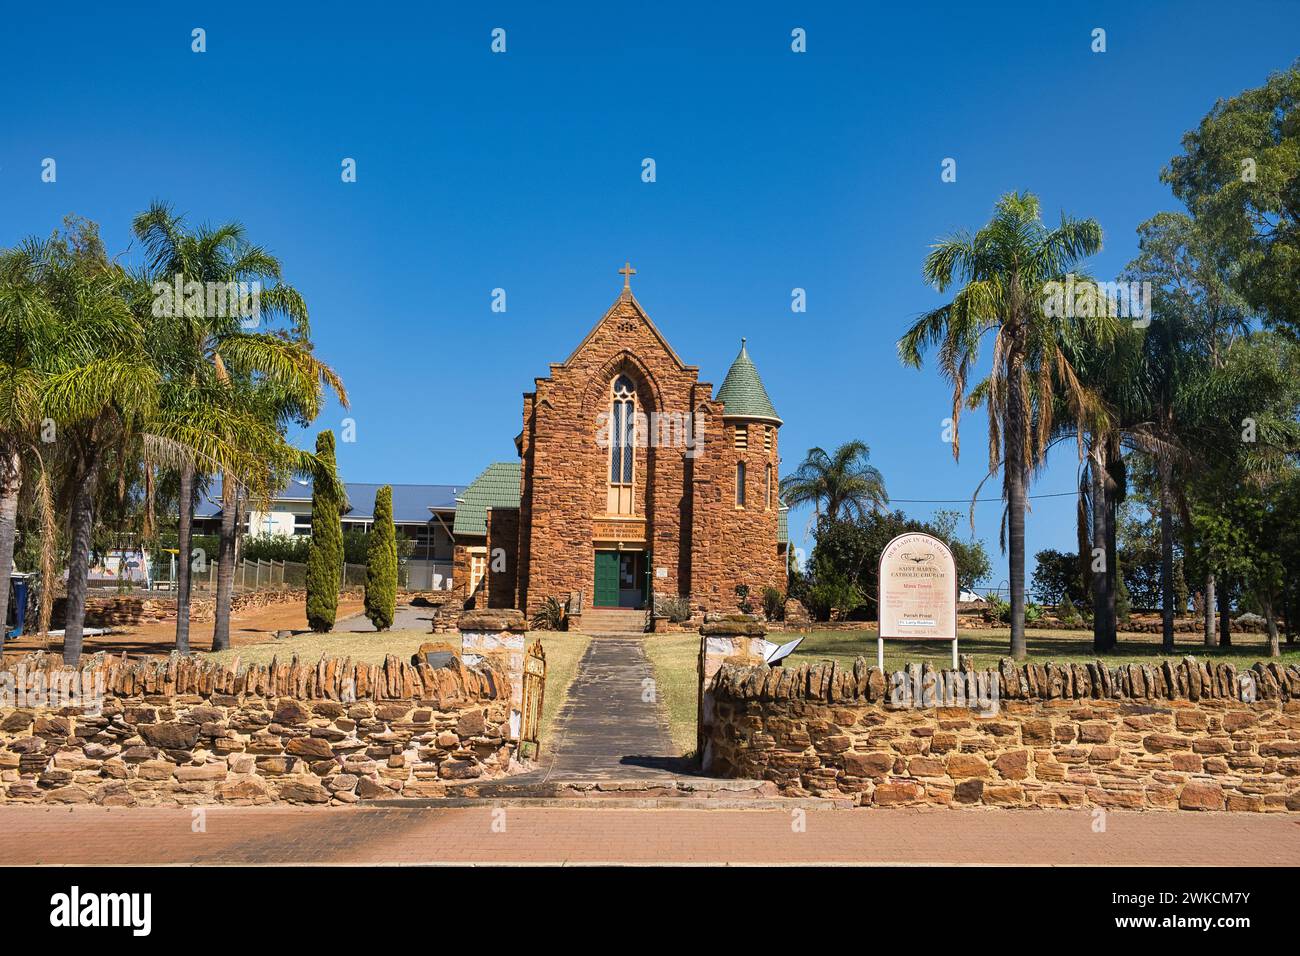 The Neo-Gothic Saint Mary’s Church (Our Lady of Ara Coeli), constructed of rough hammer-dressed red sandstone, in Northampton, Western Australia Stock Photo